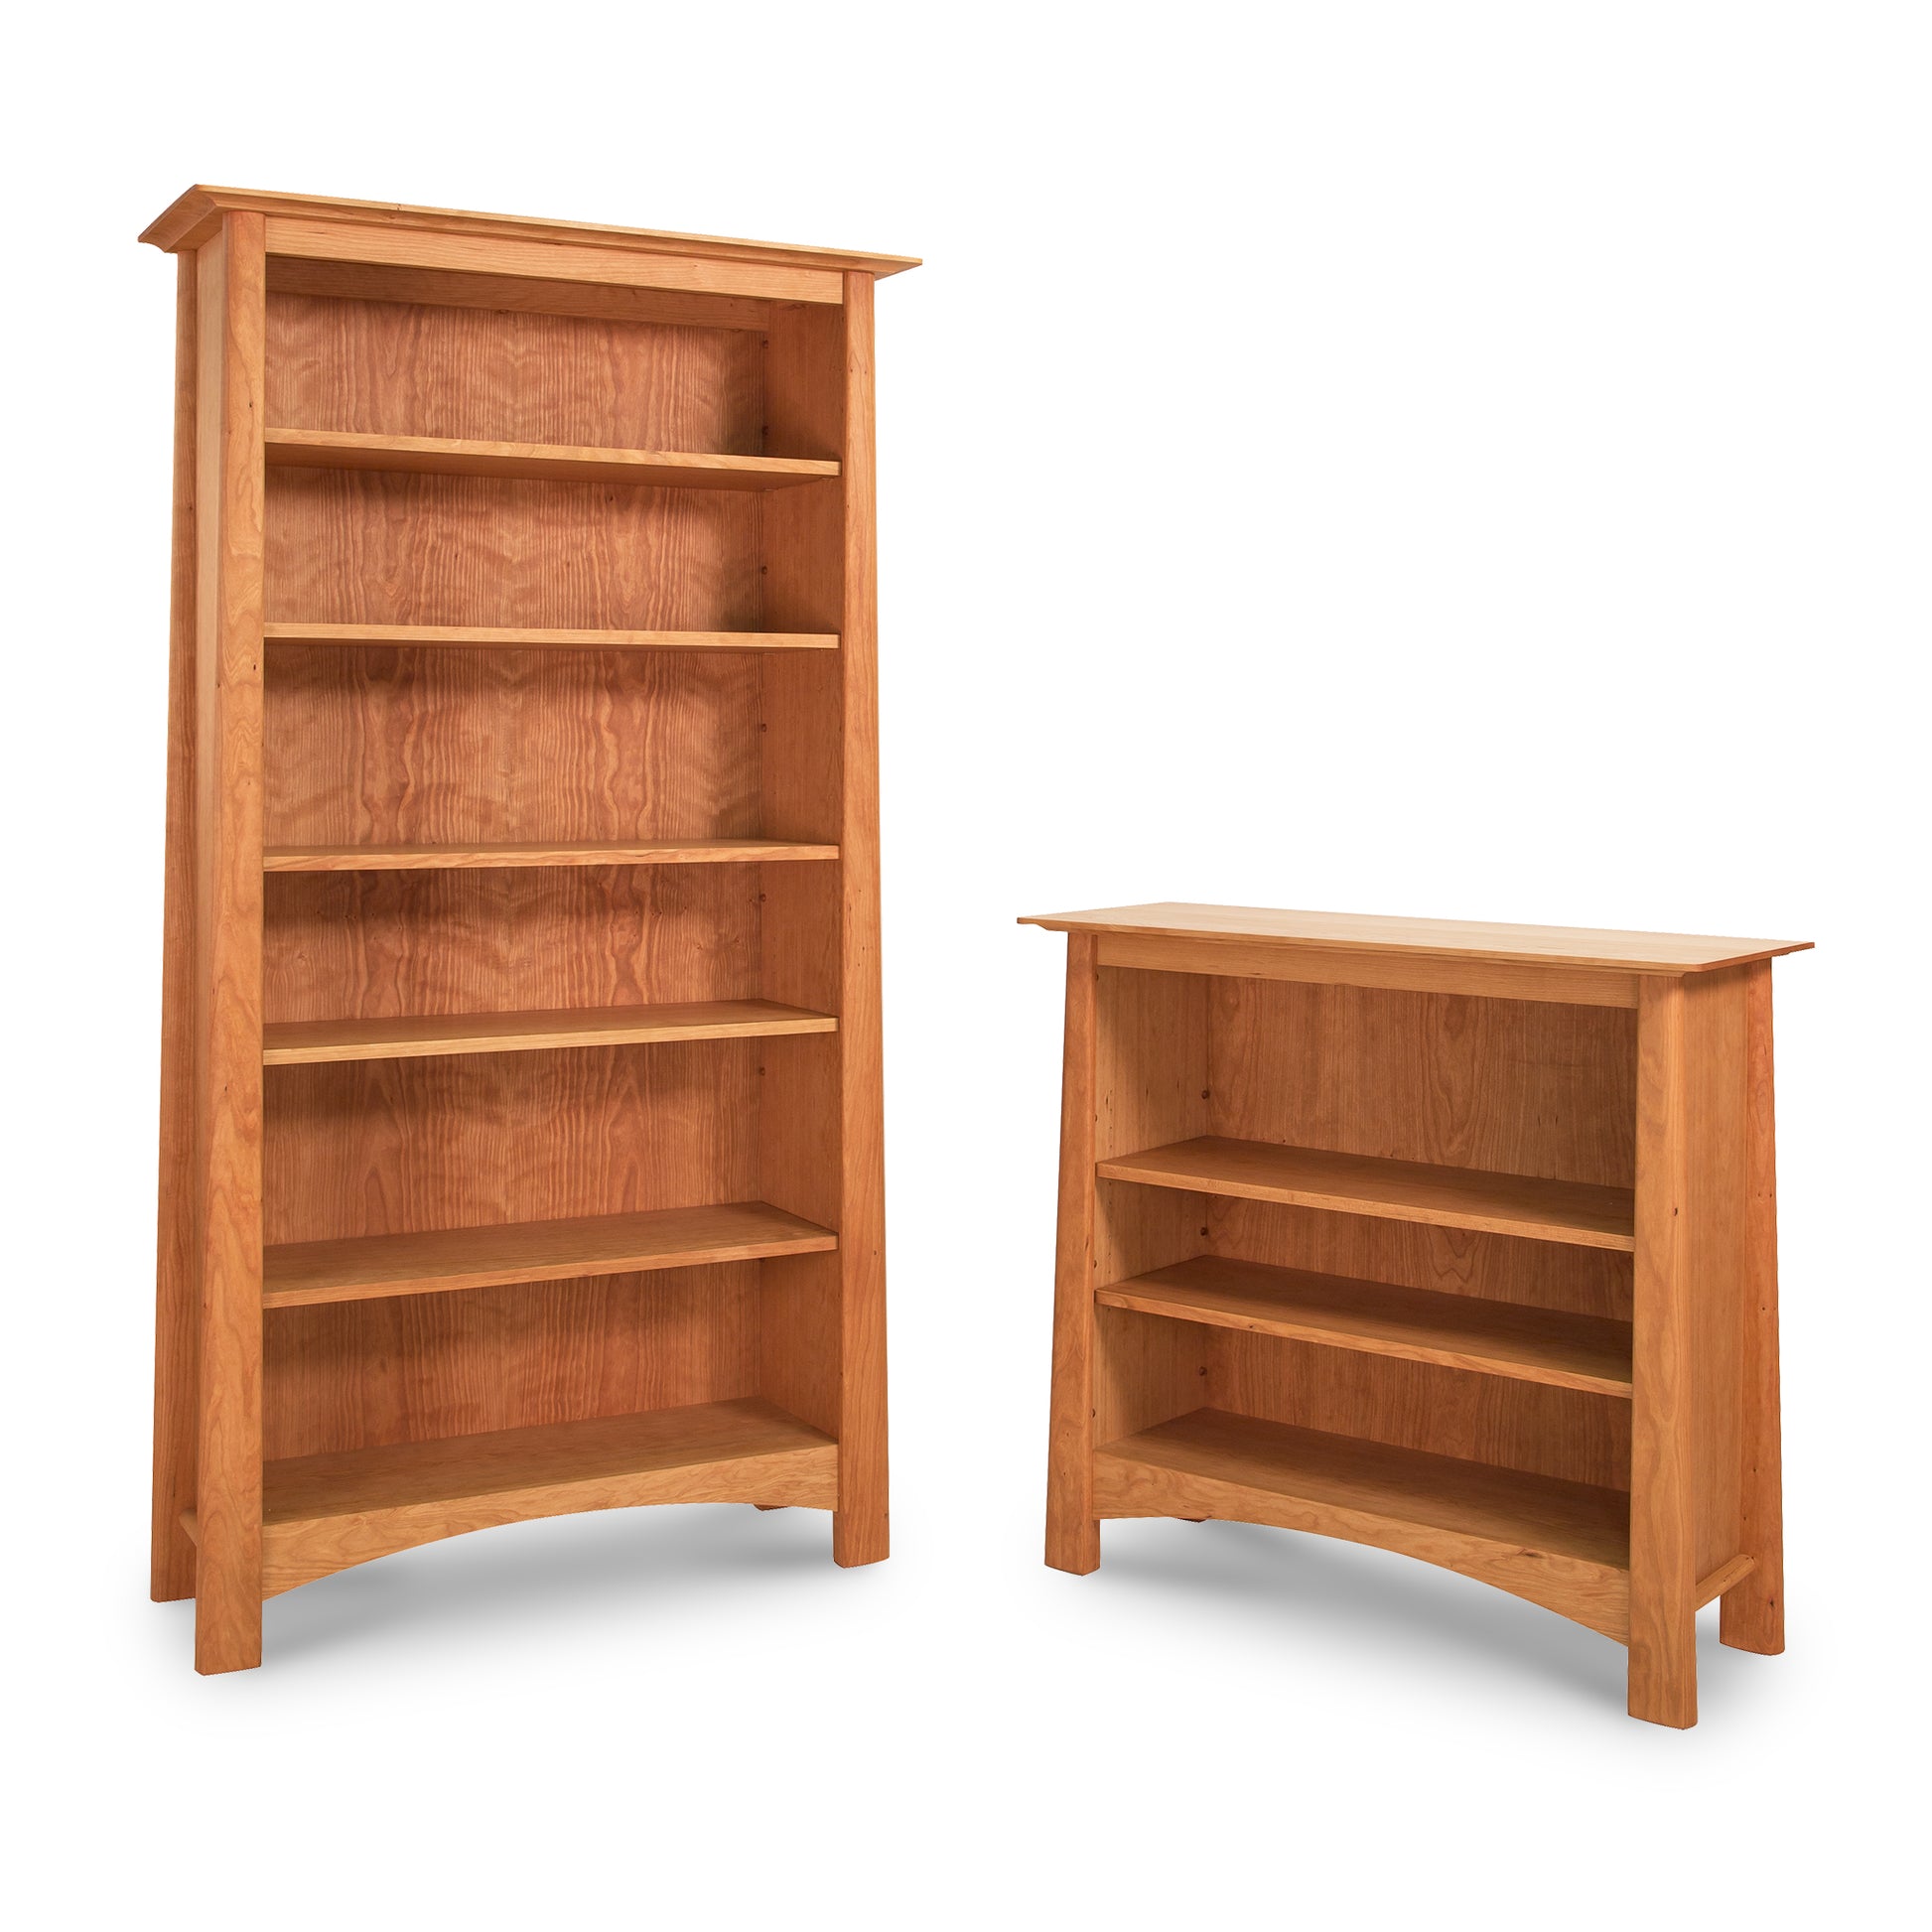 Two empty Maple Corner Woodworks Cherry Moon Bookcases, crafted from sustainably harvested hardwoods of different heights, are isolated on a white background.